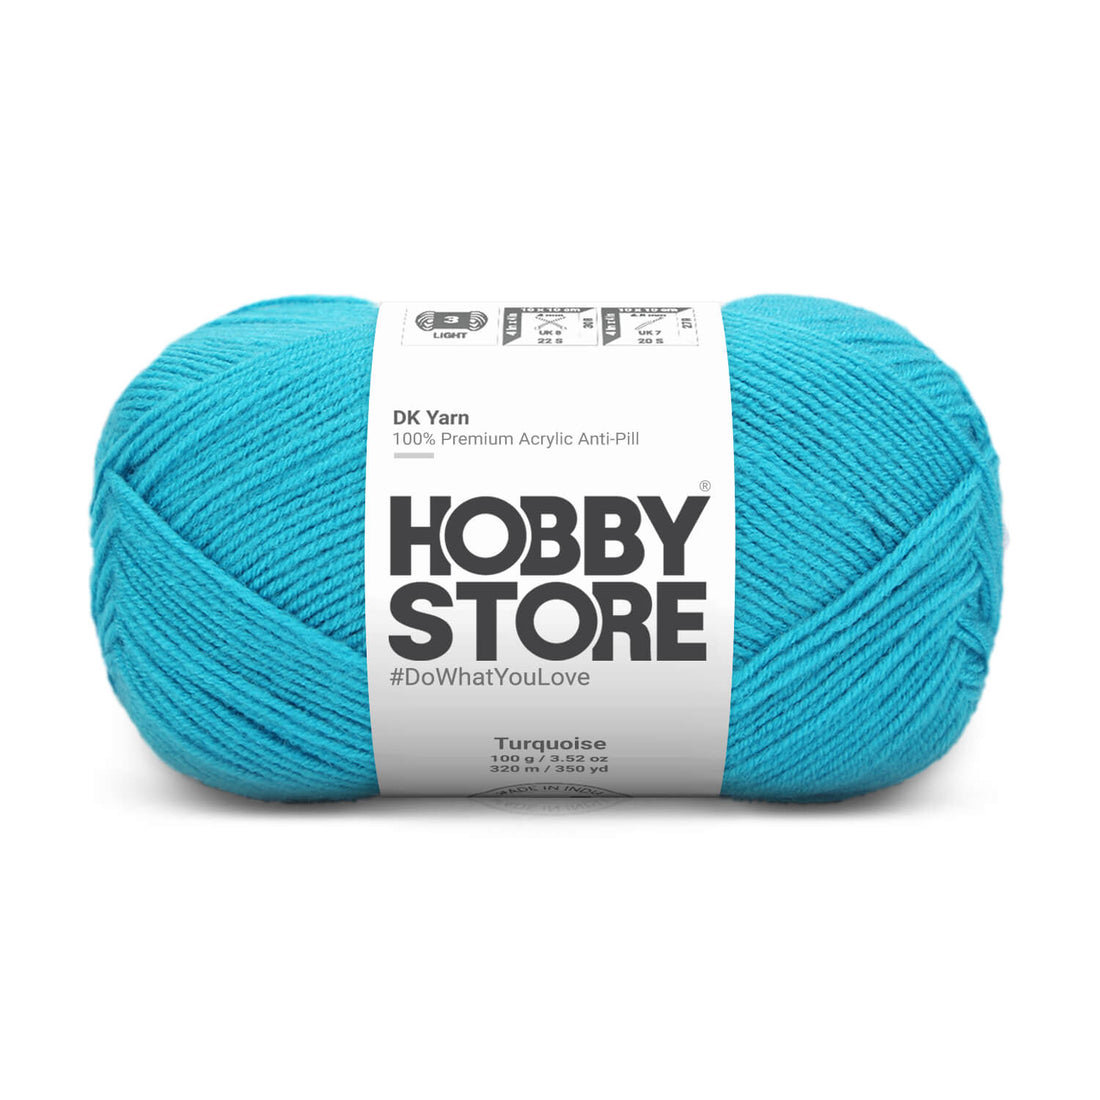 DK Anti-Pill Yarn by Hobby Store - Turquoise 1068